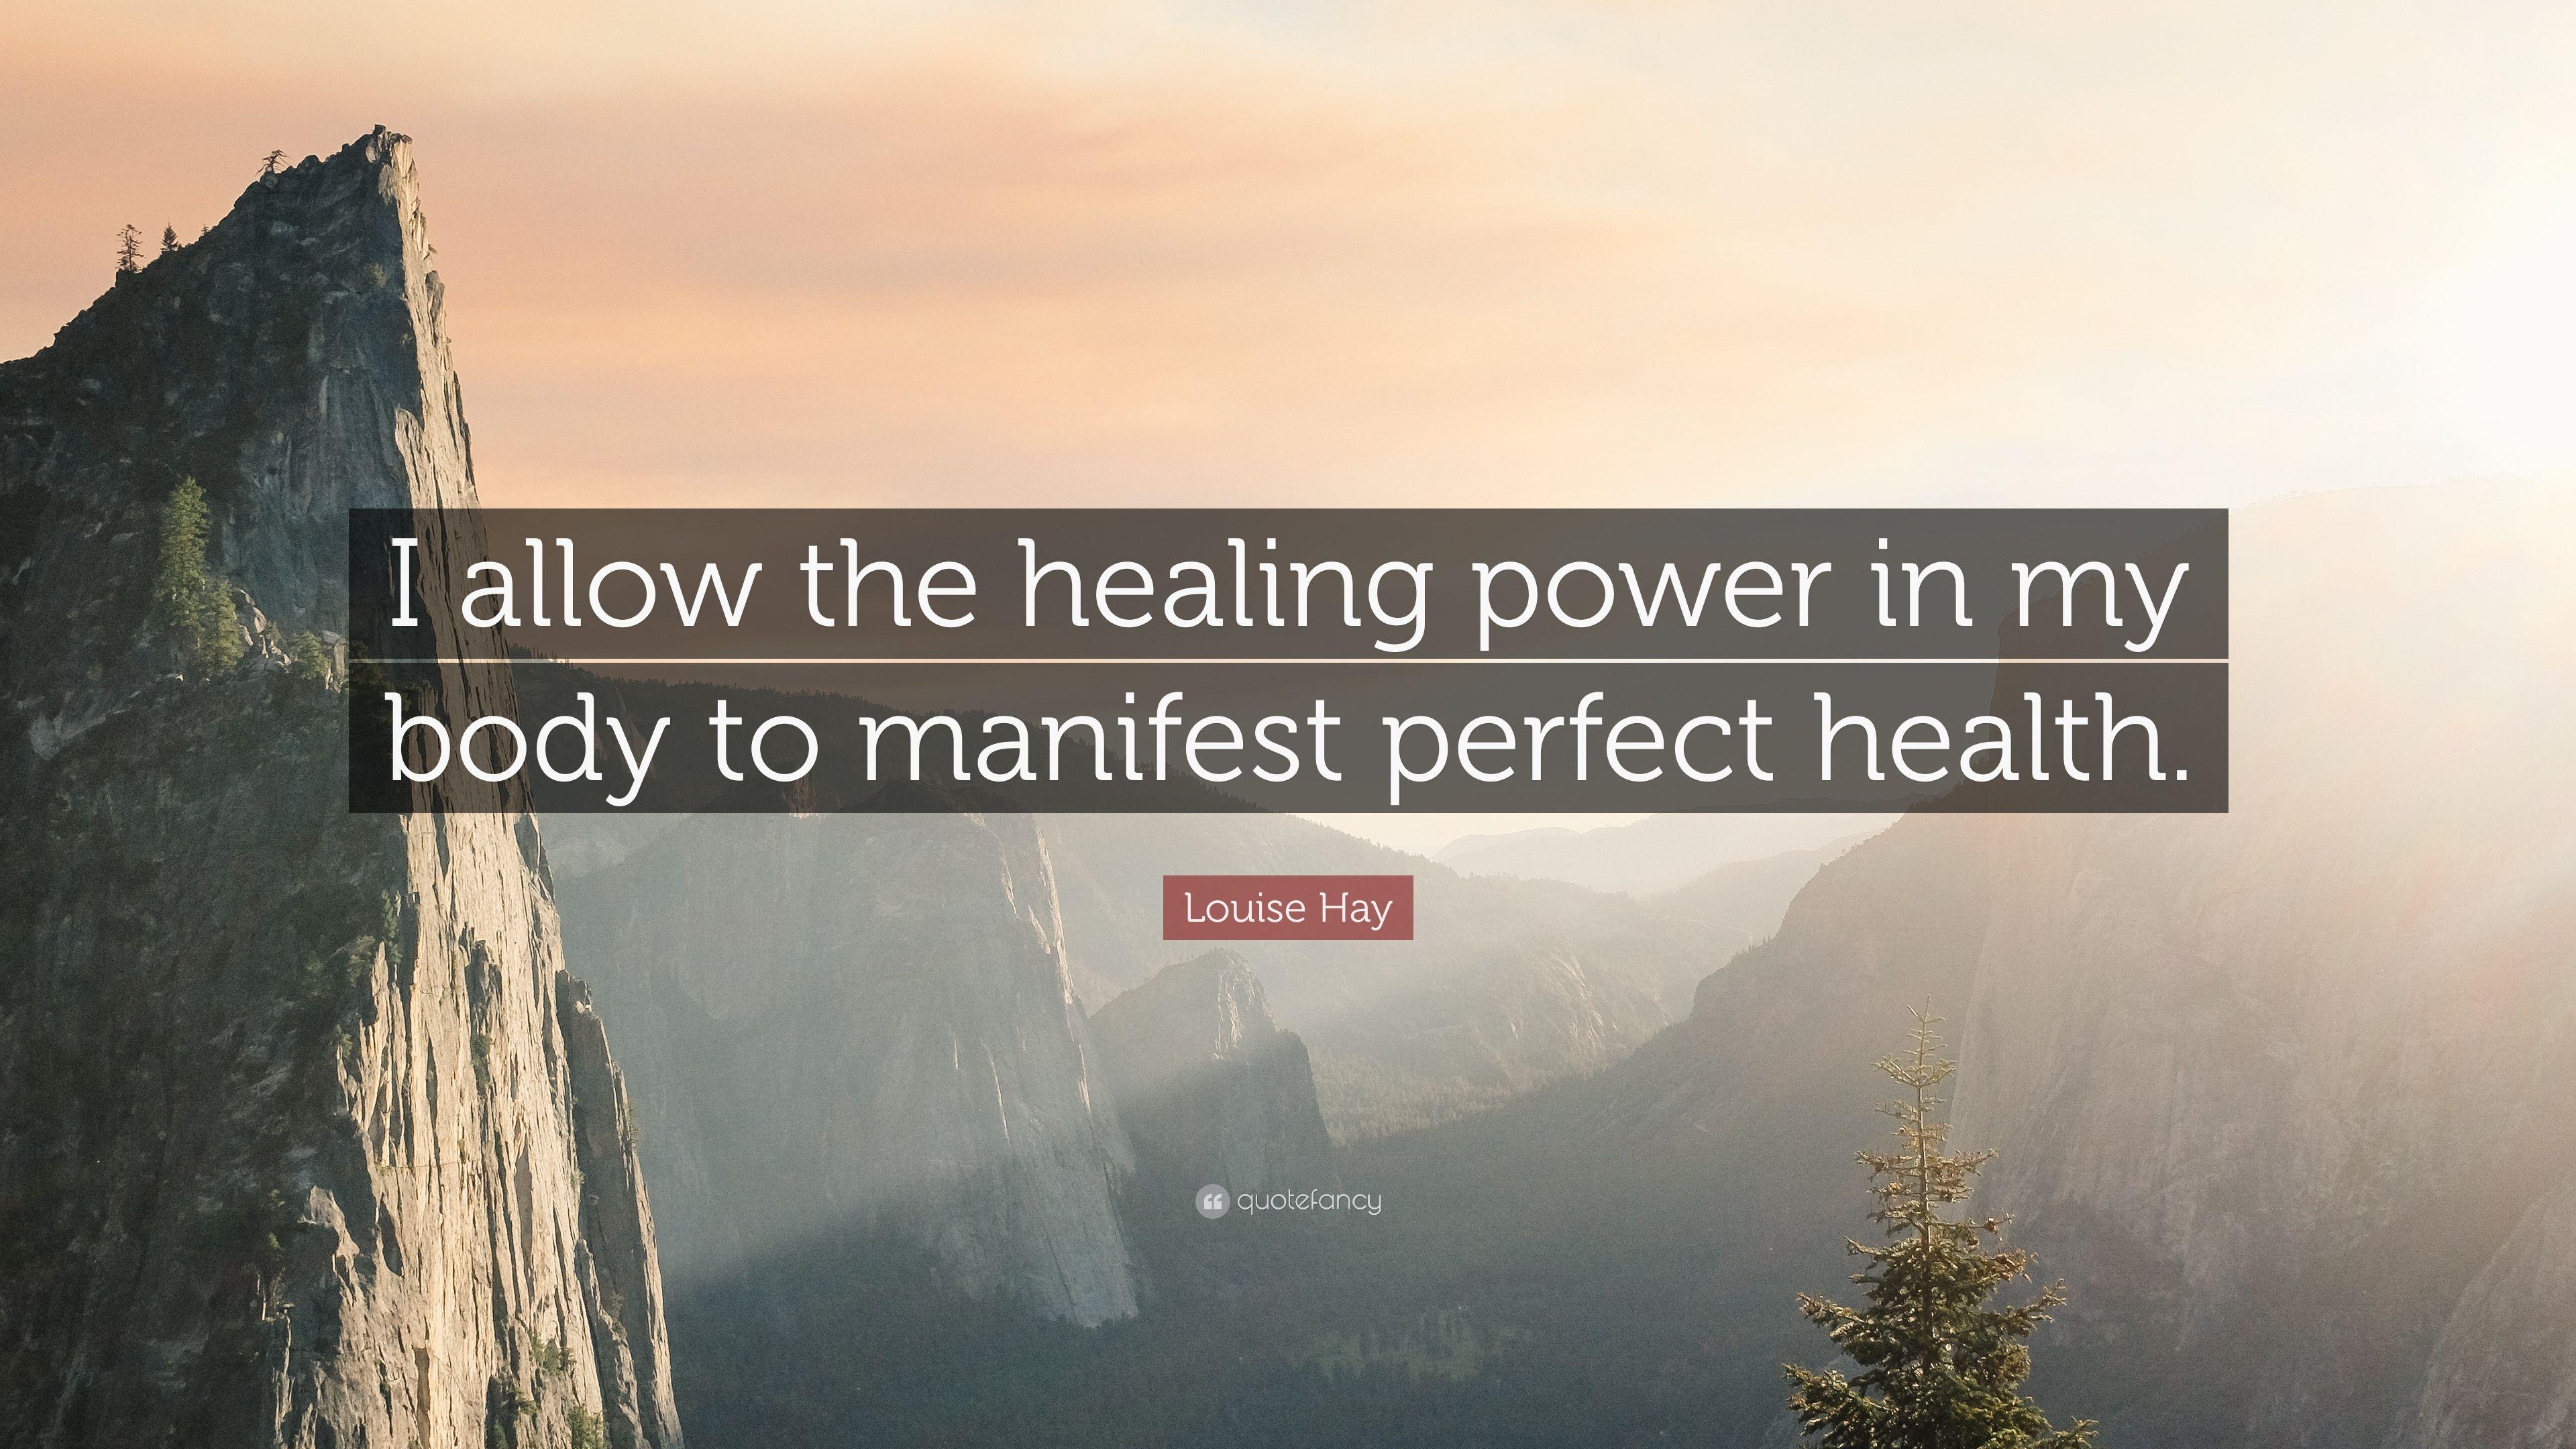 Louise Hay Quote: “I allow the healing power in my body to